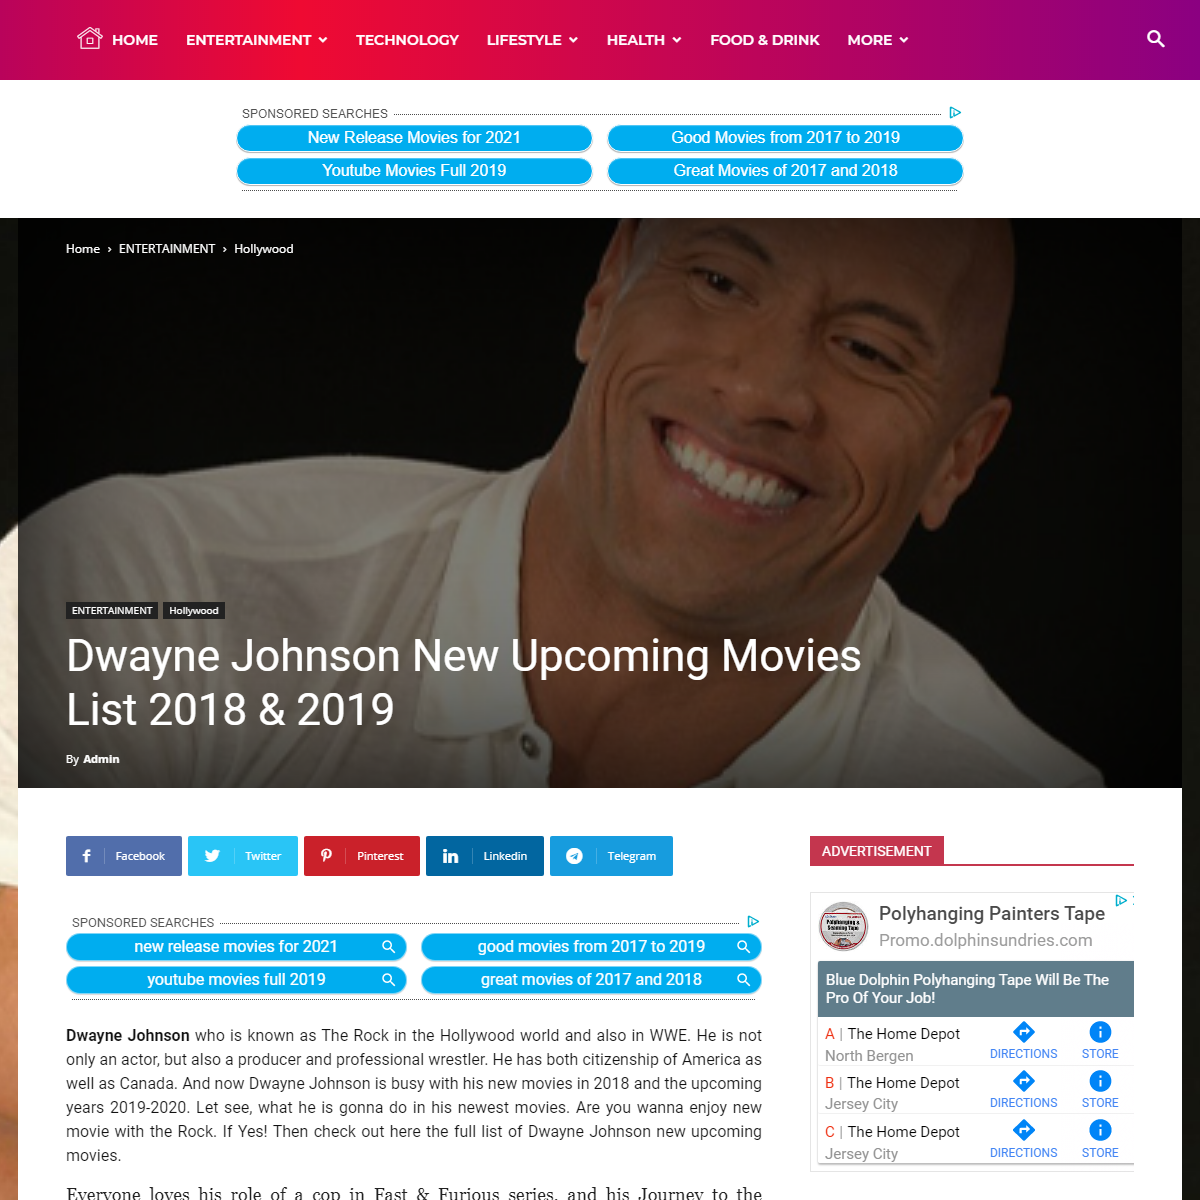 A complete backup of http://ehotbuzz.com/entertainment/hollywood/dwayne-johnson-new-movies/